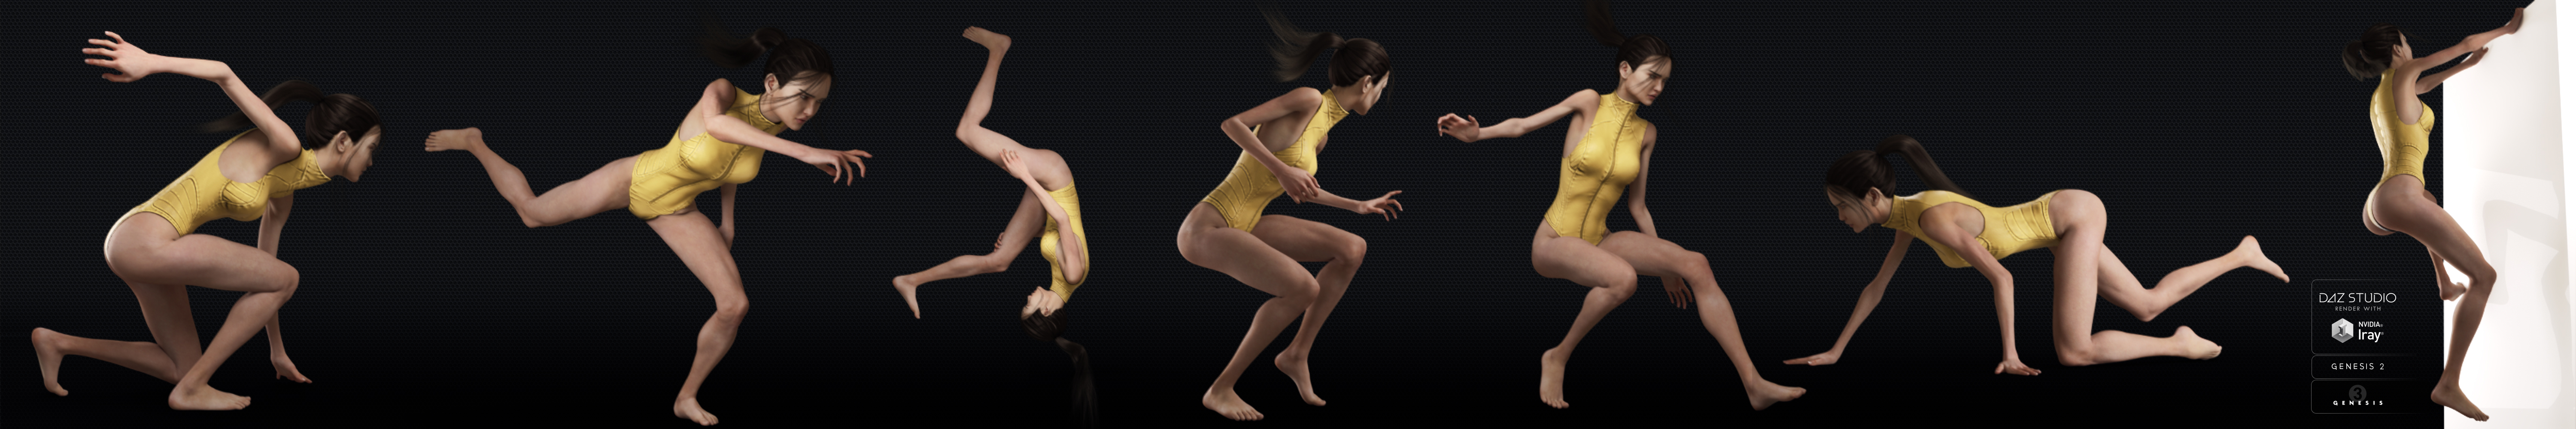 ACTIVE - Escape Poses by: Neikdian, 3D Models by Daz 3D